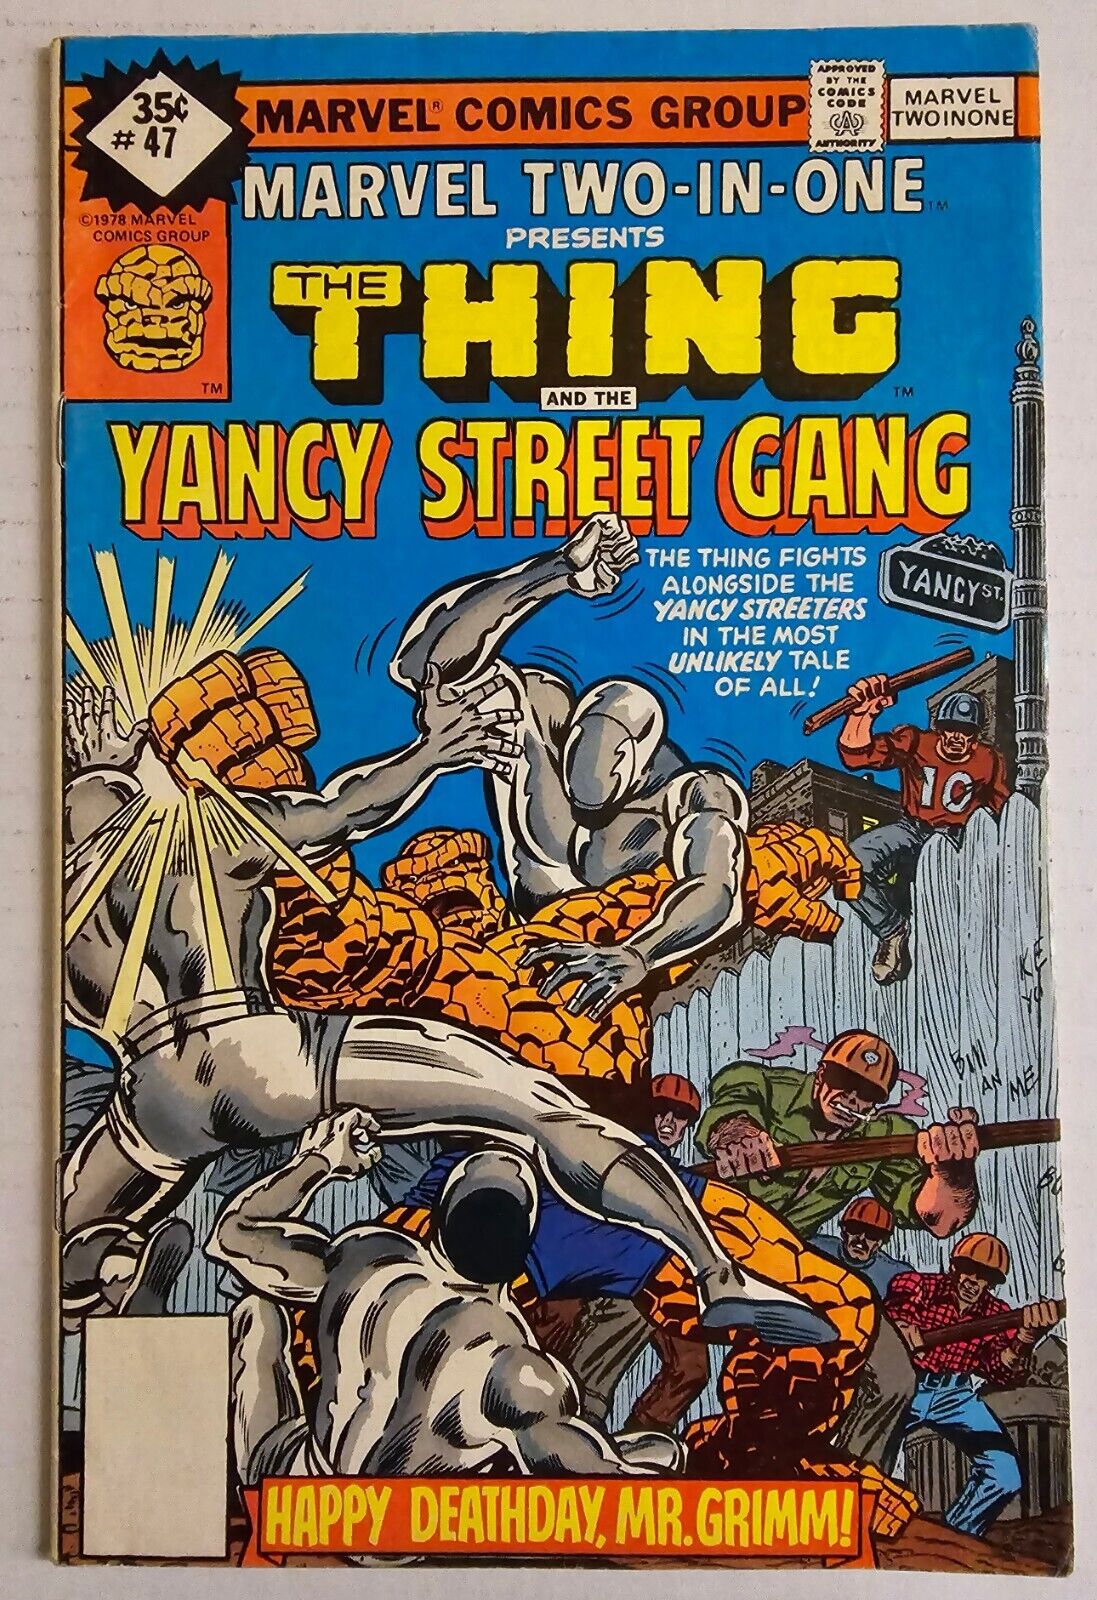 Marvel Comics MARVEL TWO IN ONE #47 THING And The YANCY STREET GANG